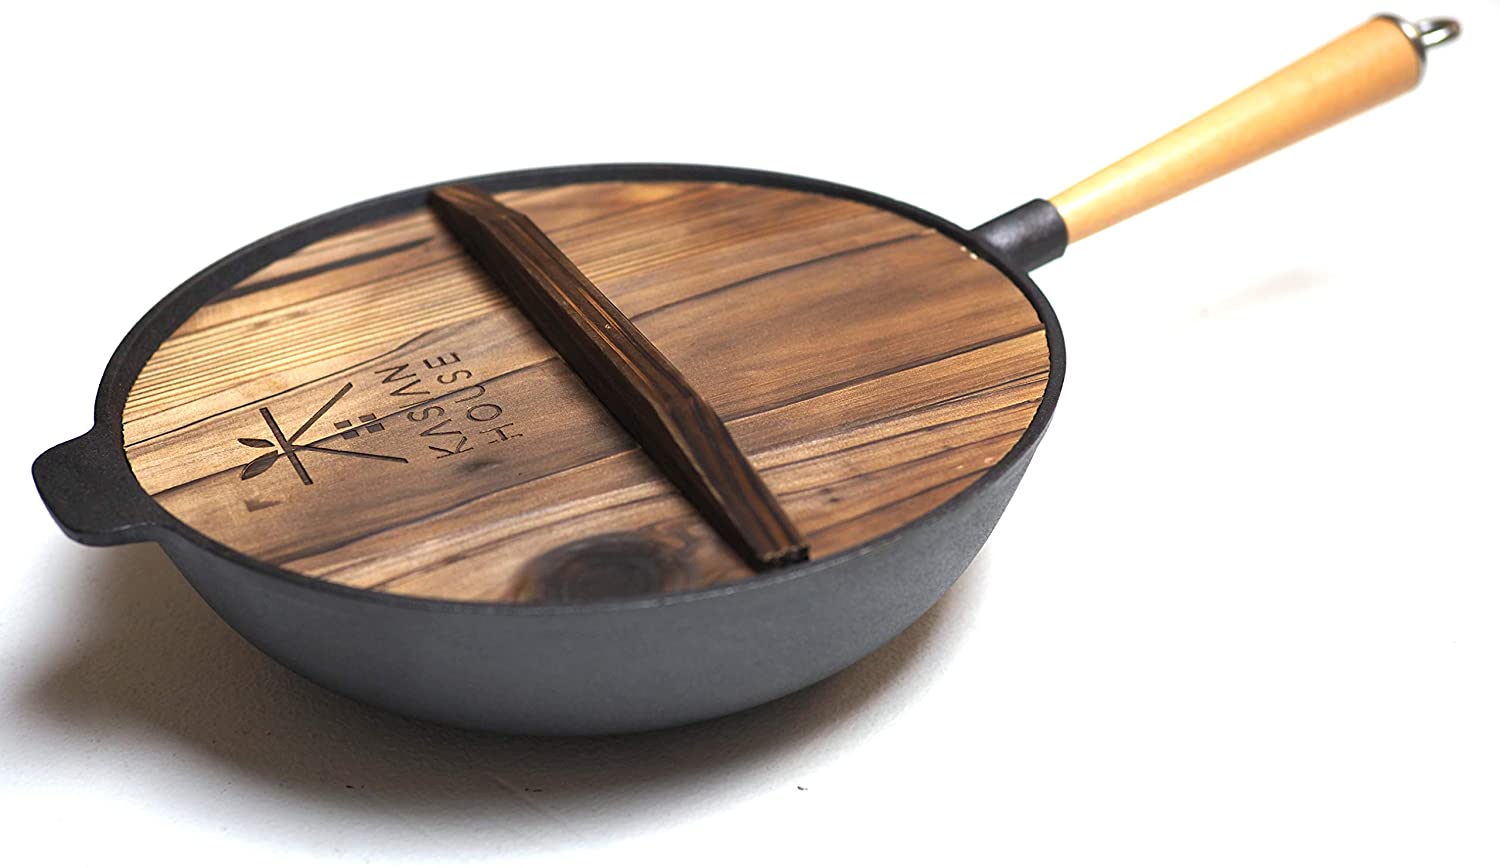 Kasian House Cast Iron Wok with Wooden Handle and Lid